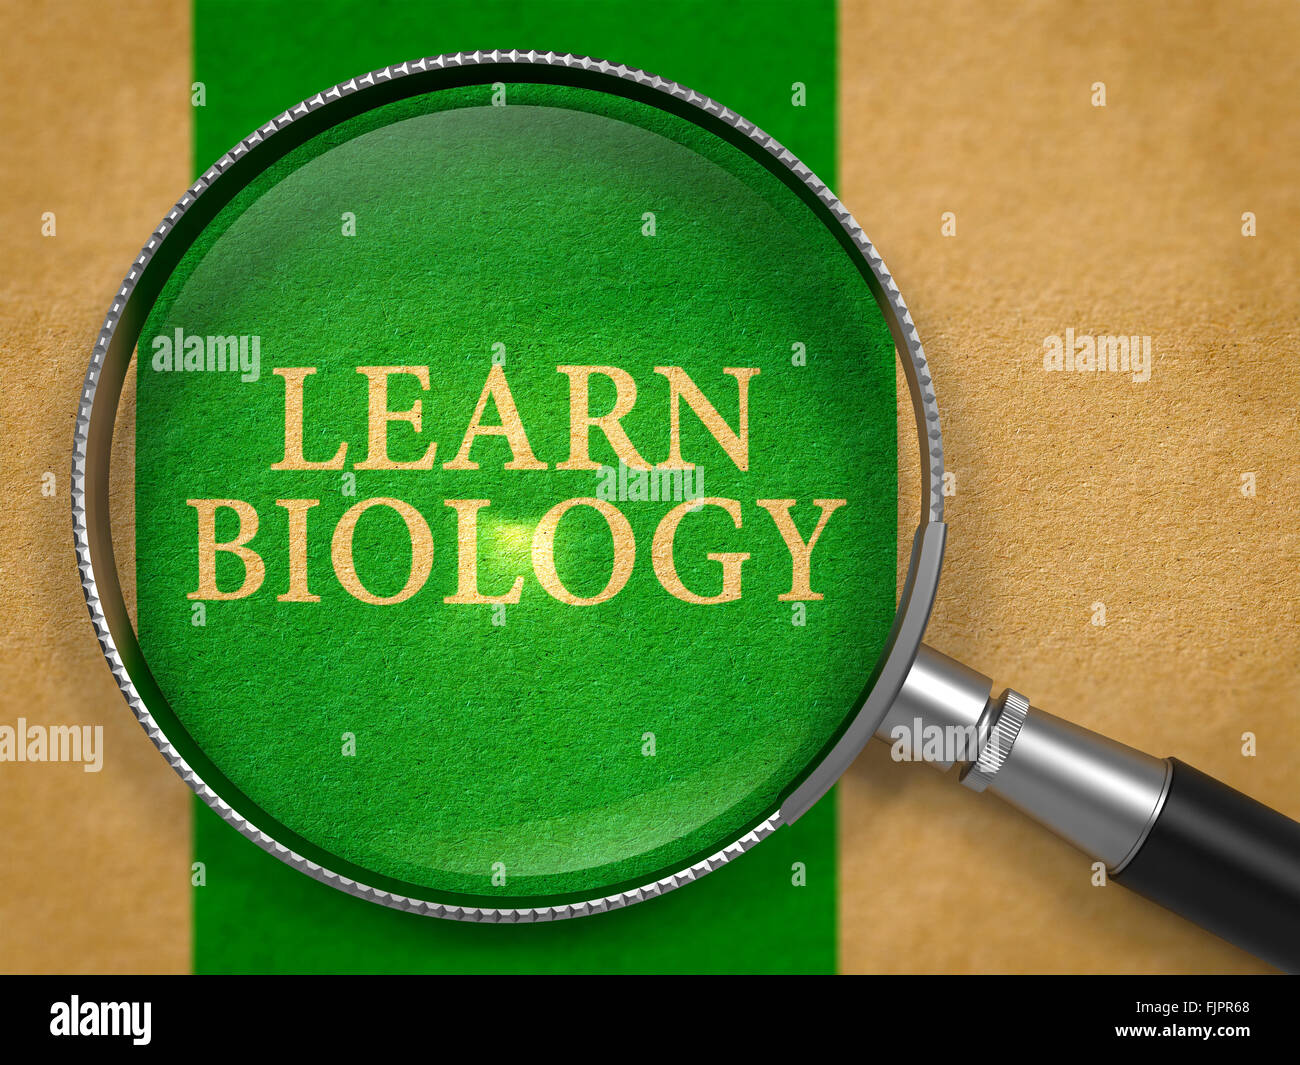 Learn Biology through Magnifying Glass. Stock Photo